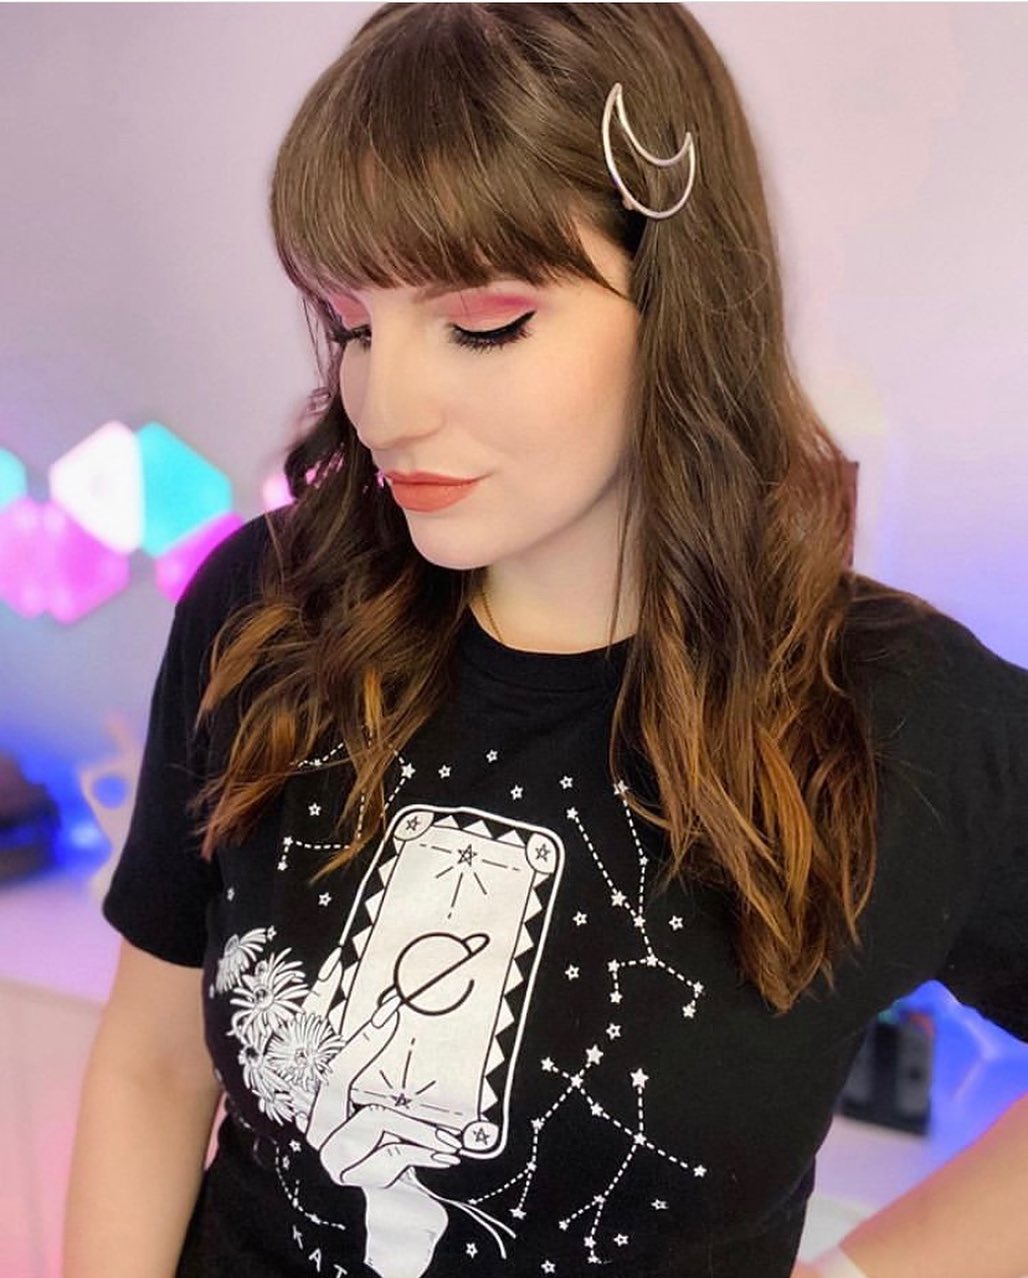 DesignByHümans - @katestarktv’s new merch giving us major #Fridaythe13th vibes 🔮🌙 If you’ve created merch with us, be sure to tag us! We love to see all your ideas come to life. #designbyhumans